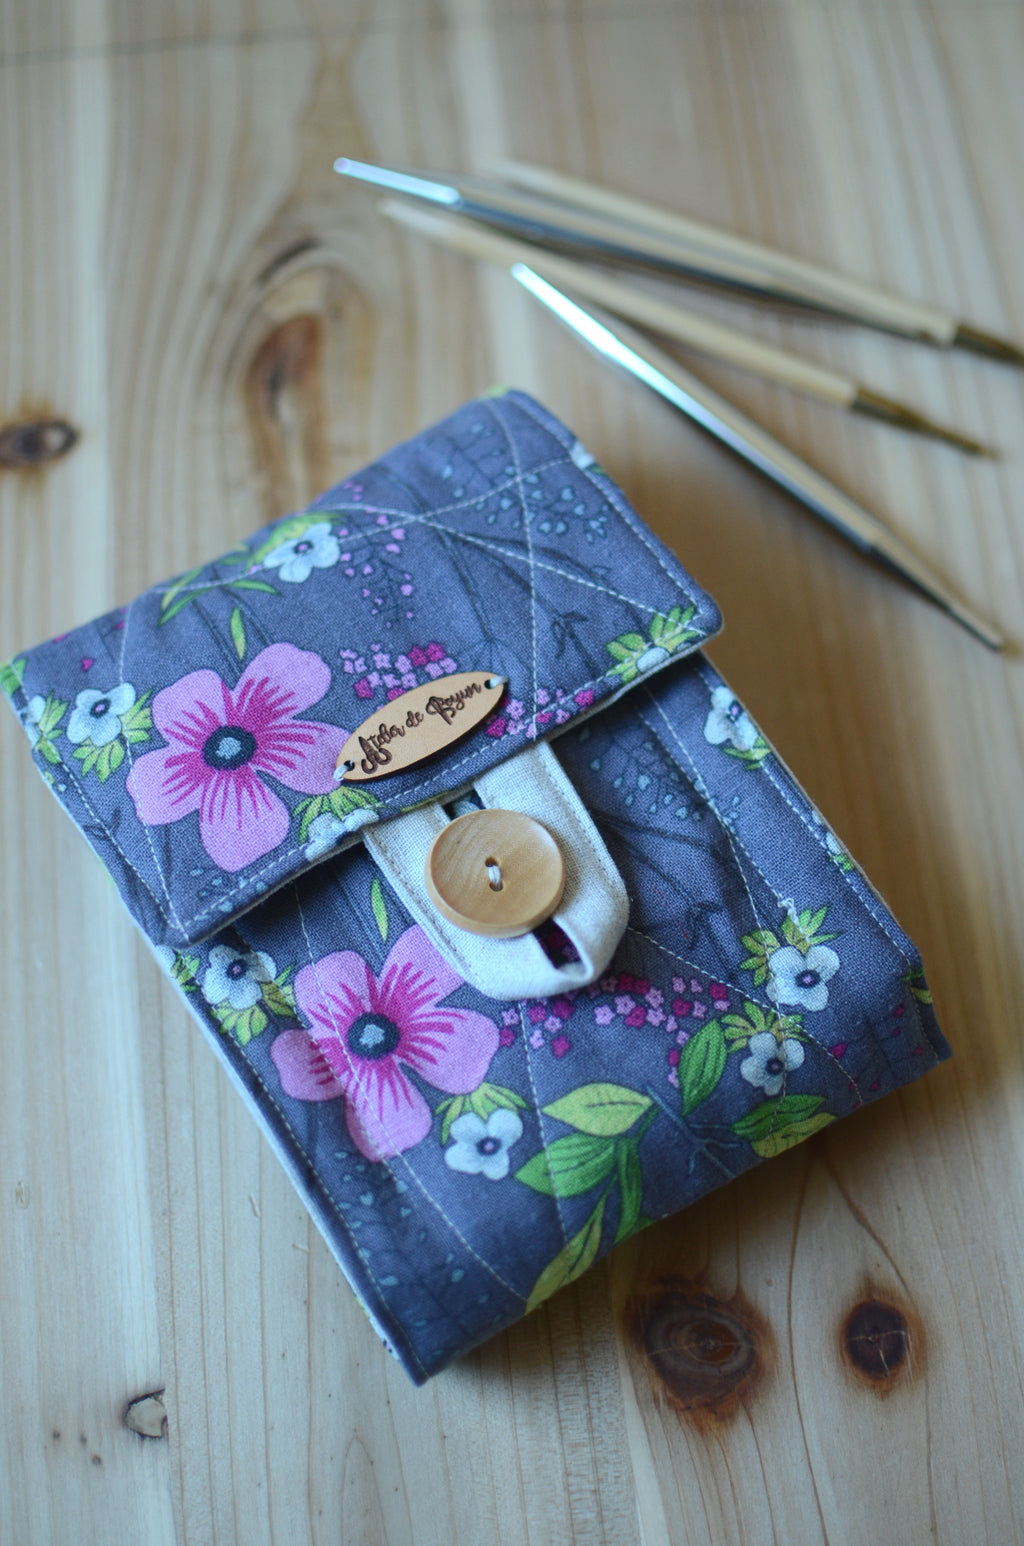 Real Leather Interchangeable Knitting Needle Case Handmade